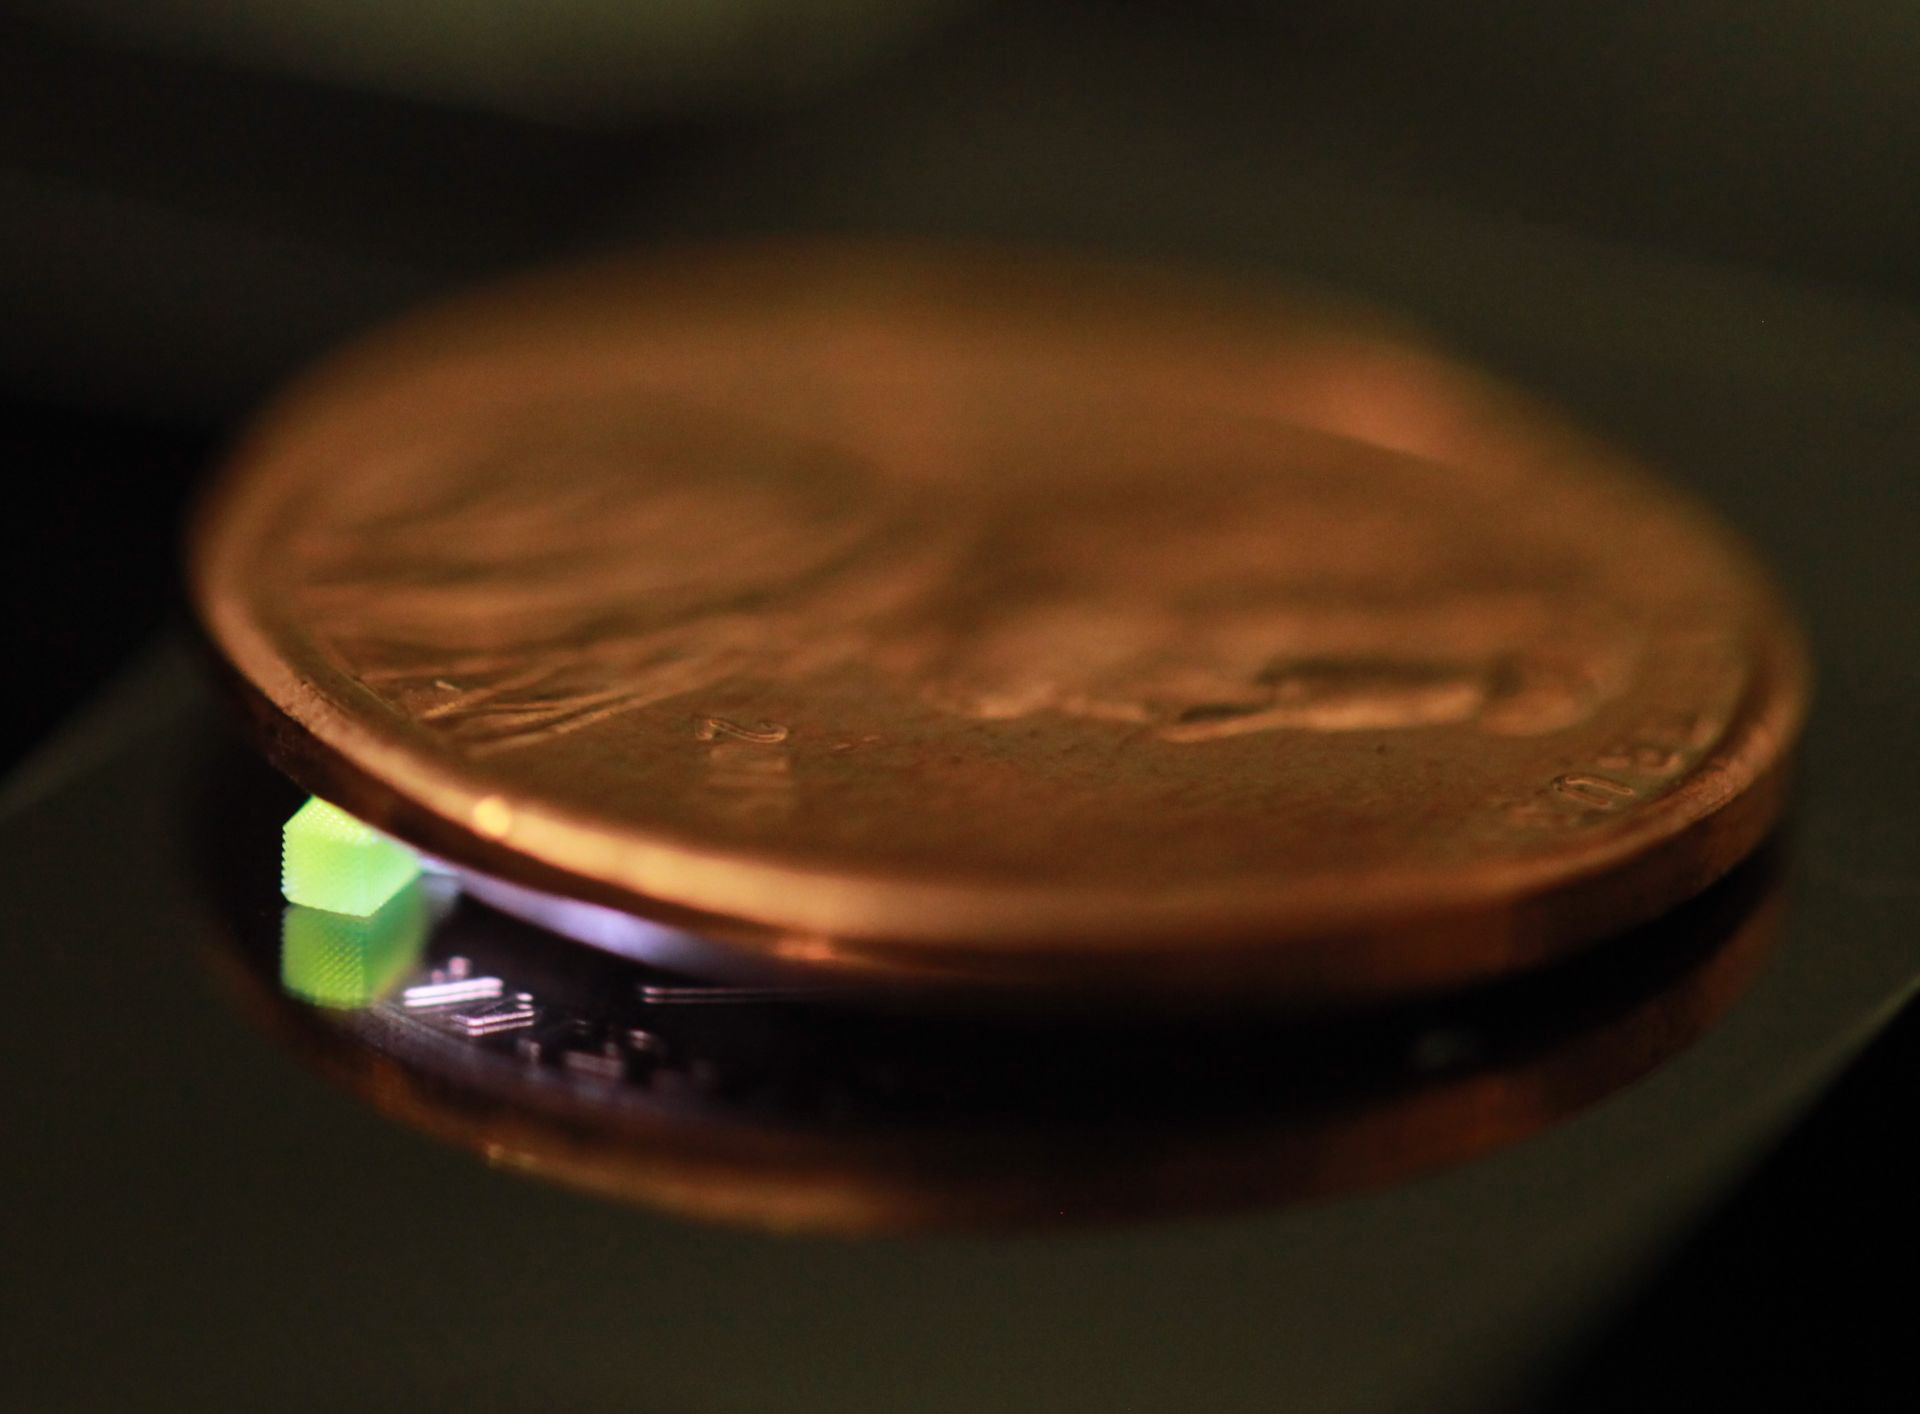 A millimeter-scale structure with submicron features is supported on a U.S. penny on top of a reflective surface. (Credit: Vu Nguyen and Sourabh Saha)